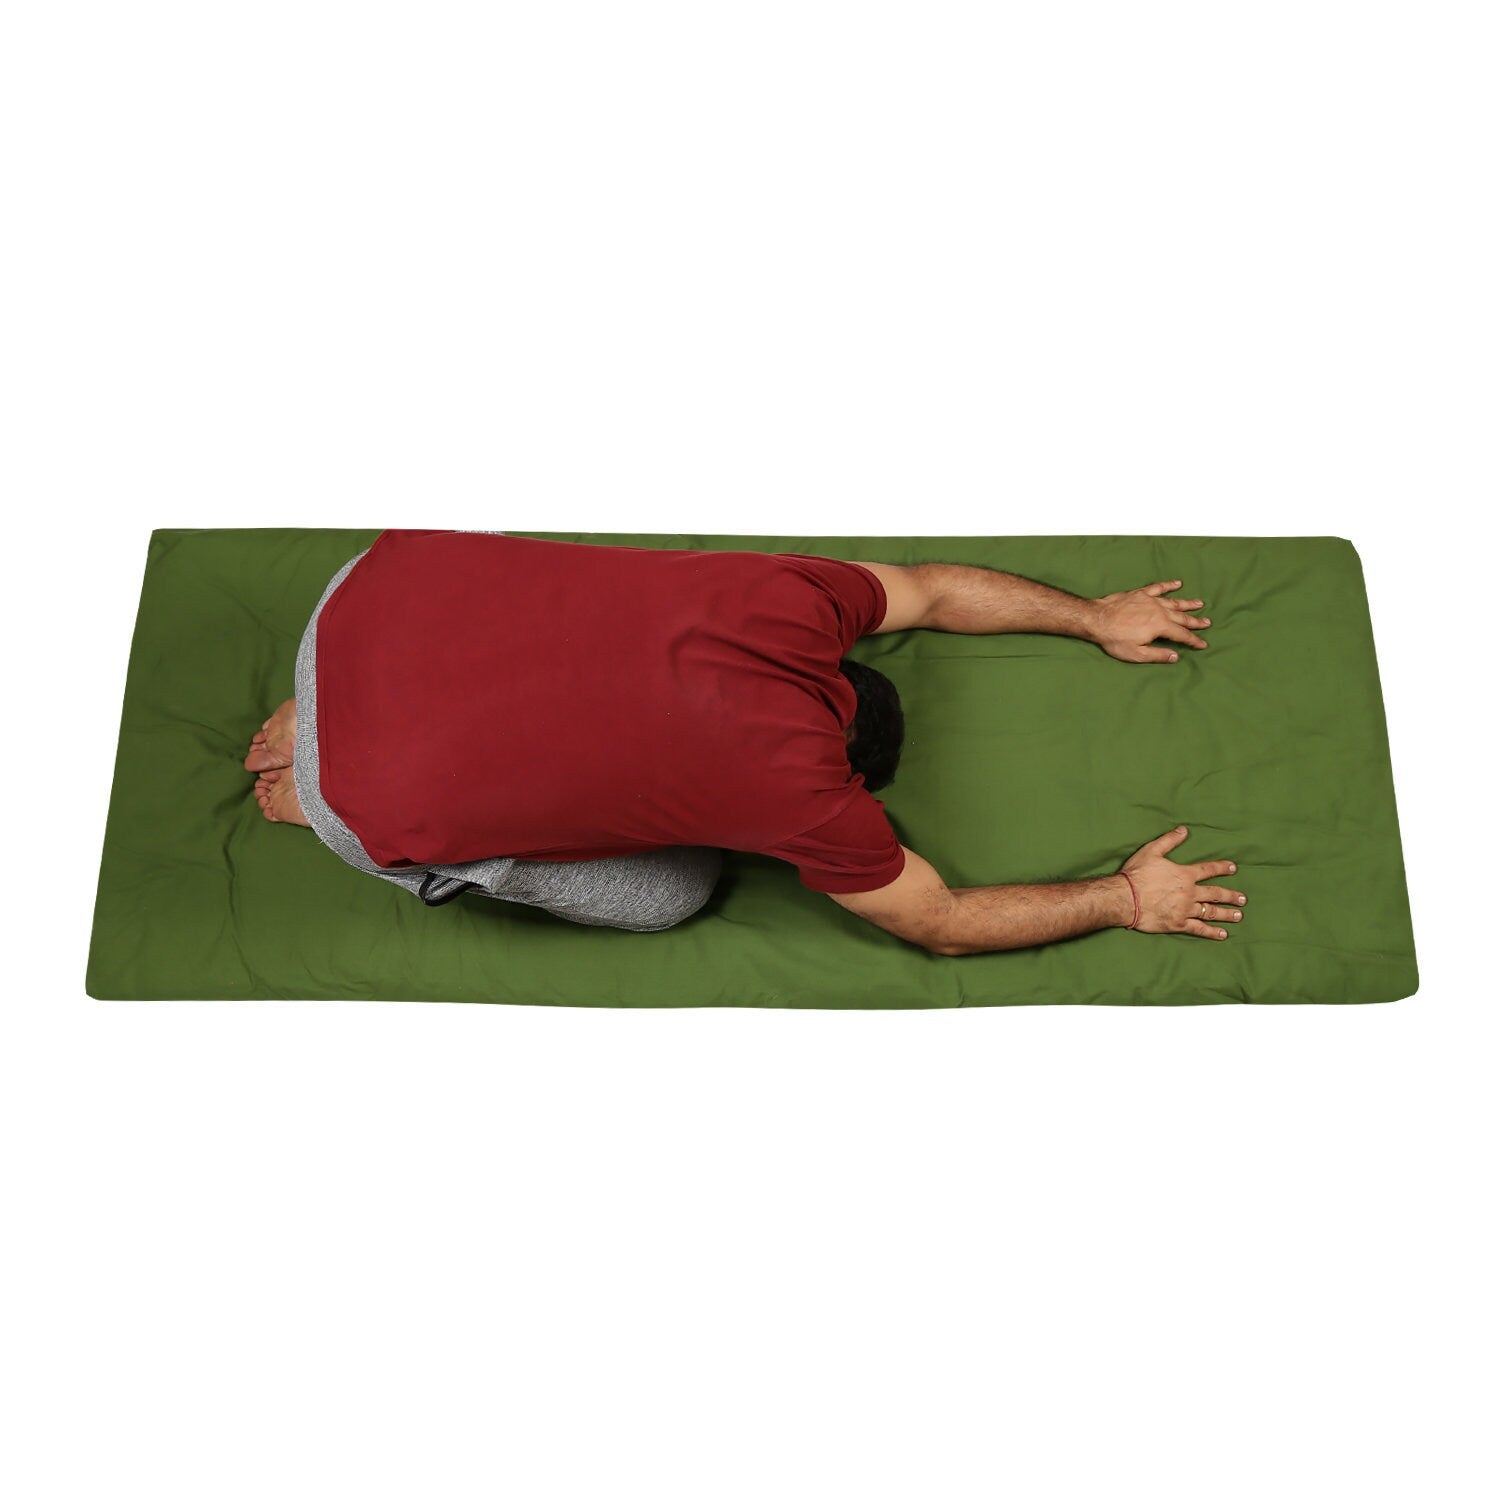 Shikibuton, Futon Meditation Mat - Kapok Filled - Removable Cotton Cover - Made in India - Colors Available